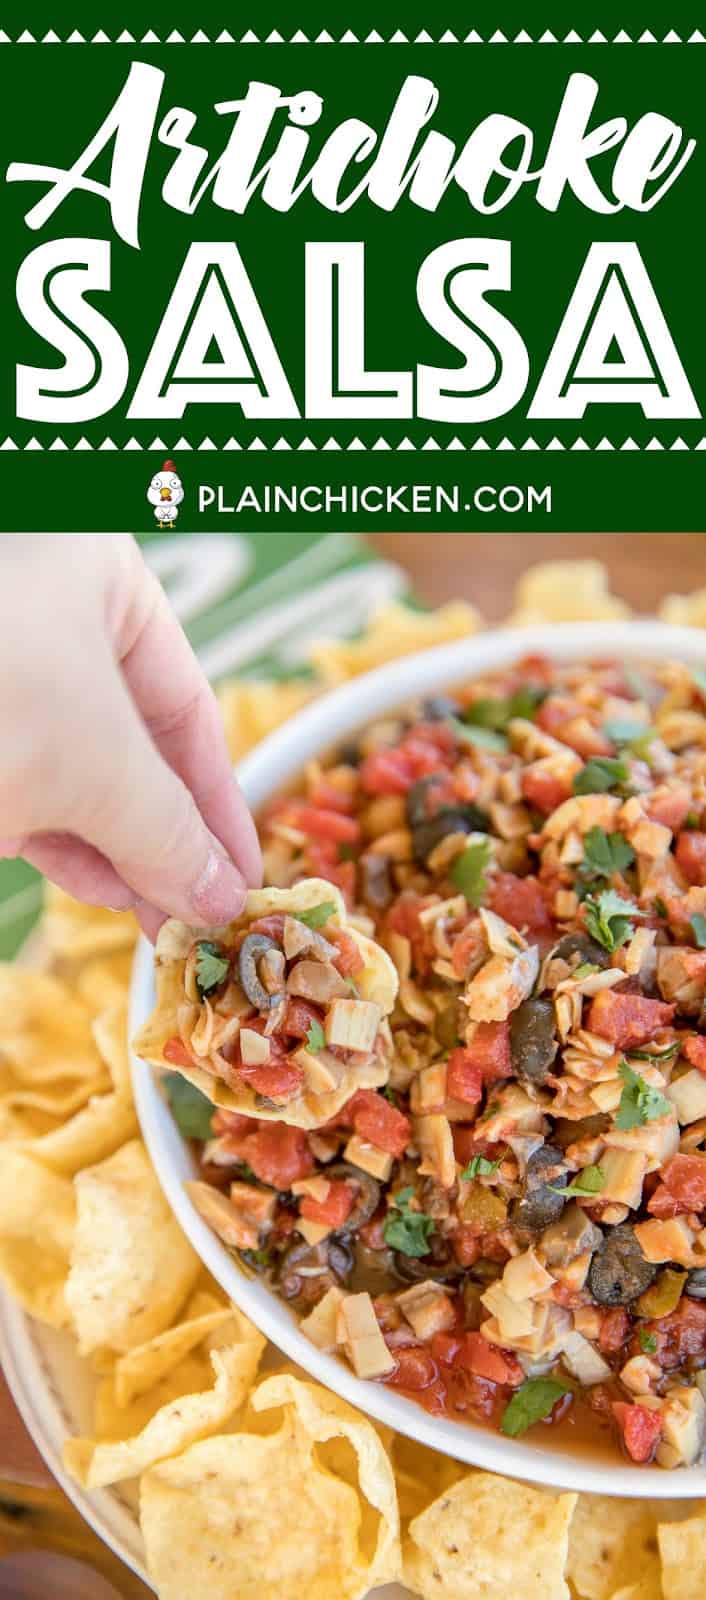 Artichoke Salsa - CRAZY good!! Artichokes, diced tomatoes and green chiles, mushrooms, black olives, red wine vinegar, cilantro, garlic slat and hot sauce. Serve with chips or spoon over grilled chicken. I took this to a dinner party and there were no leftovers! Everyone asked for the recipe!! A big hit! #salsa #veggies #dip #partyfood